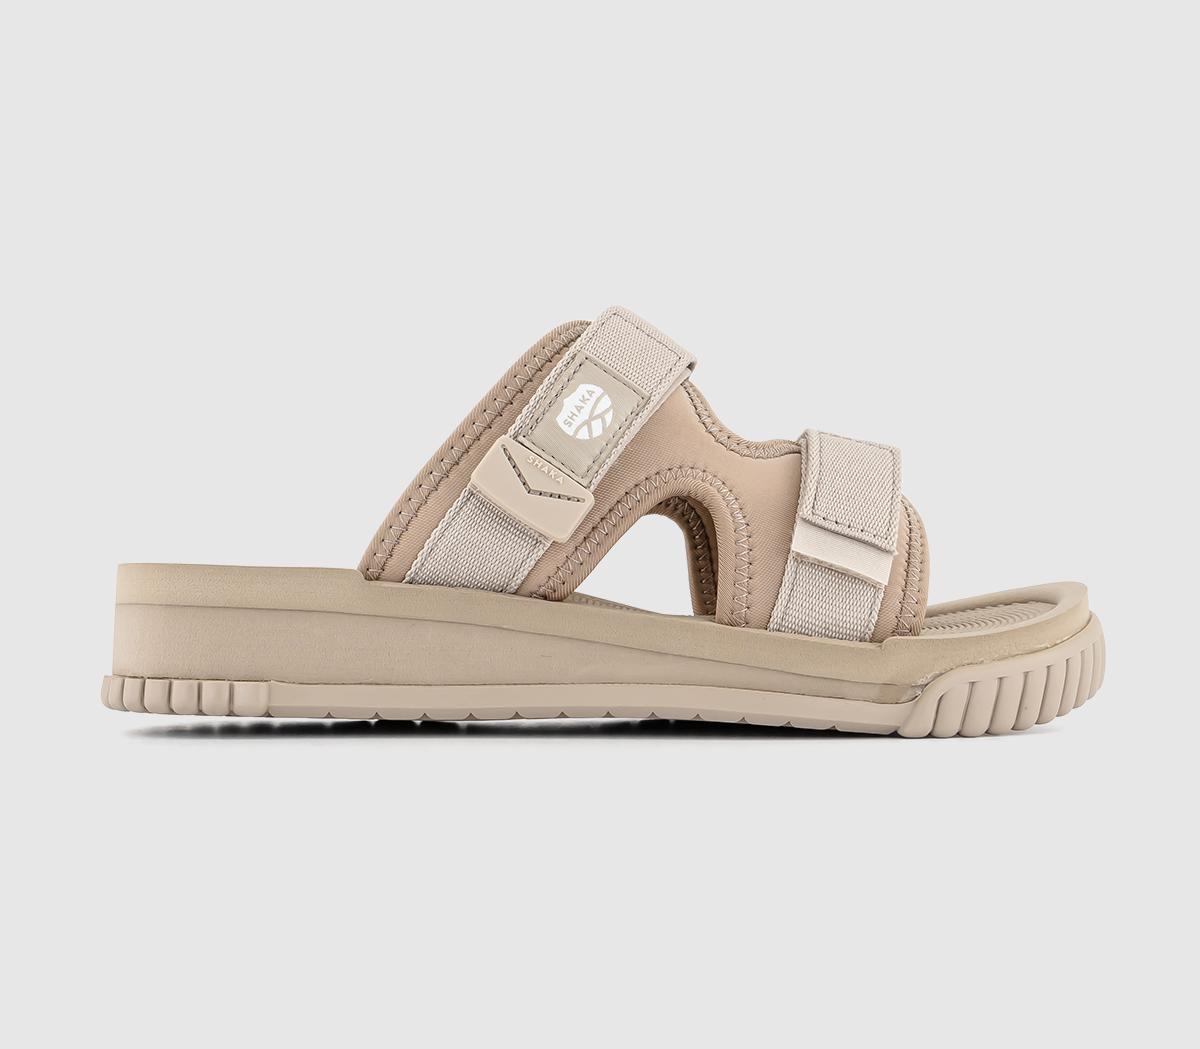 SHAKA Chill Out Sandals Taupe - Women's Sandals